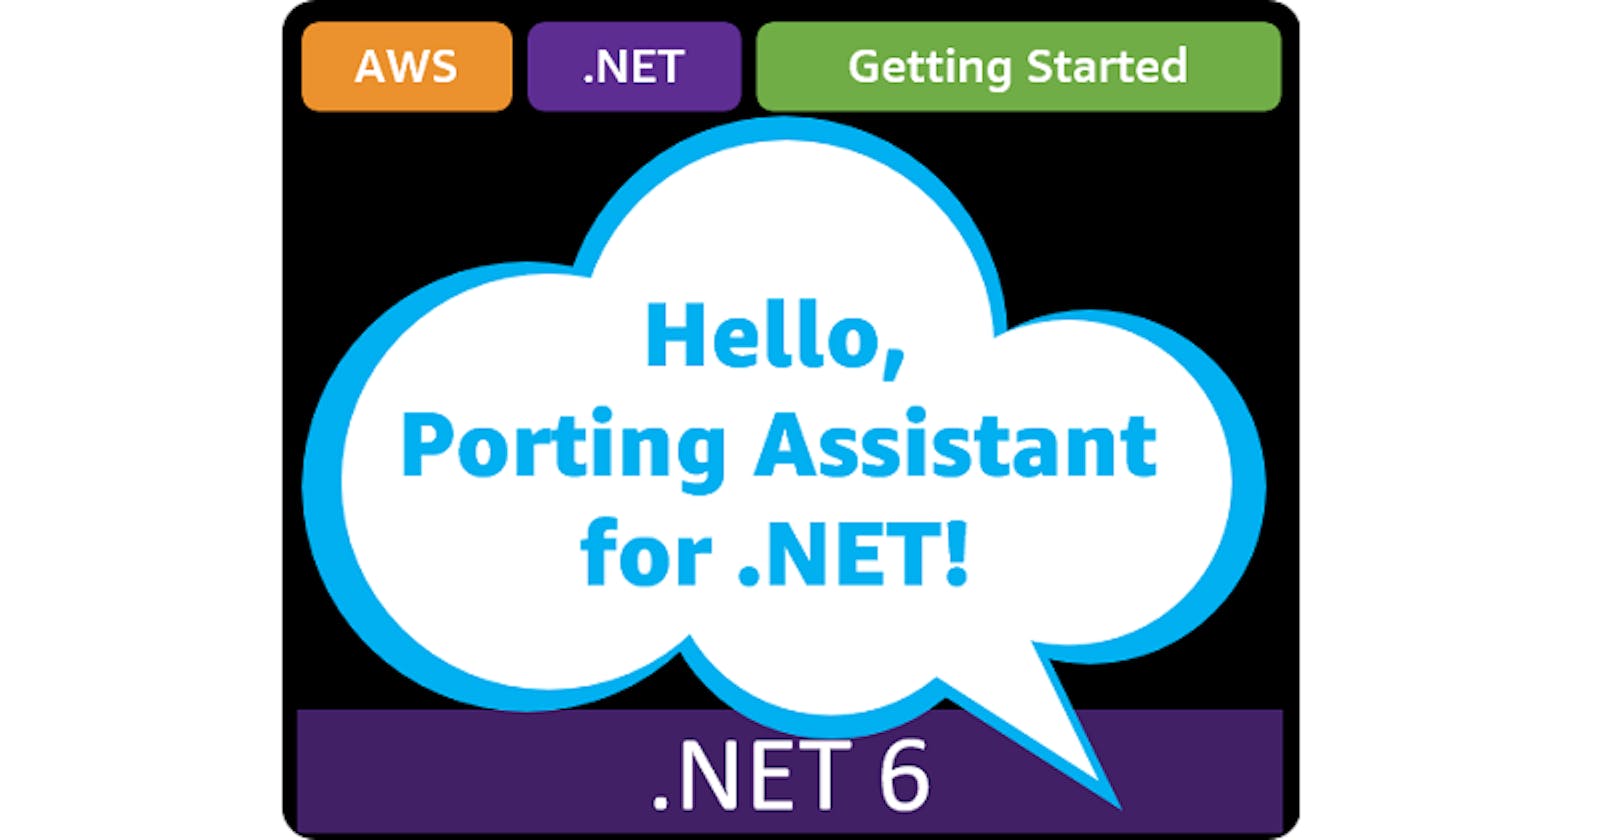 Hello, Porting Assistant for .NET